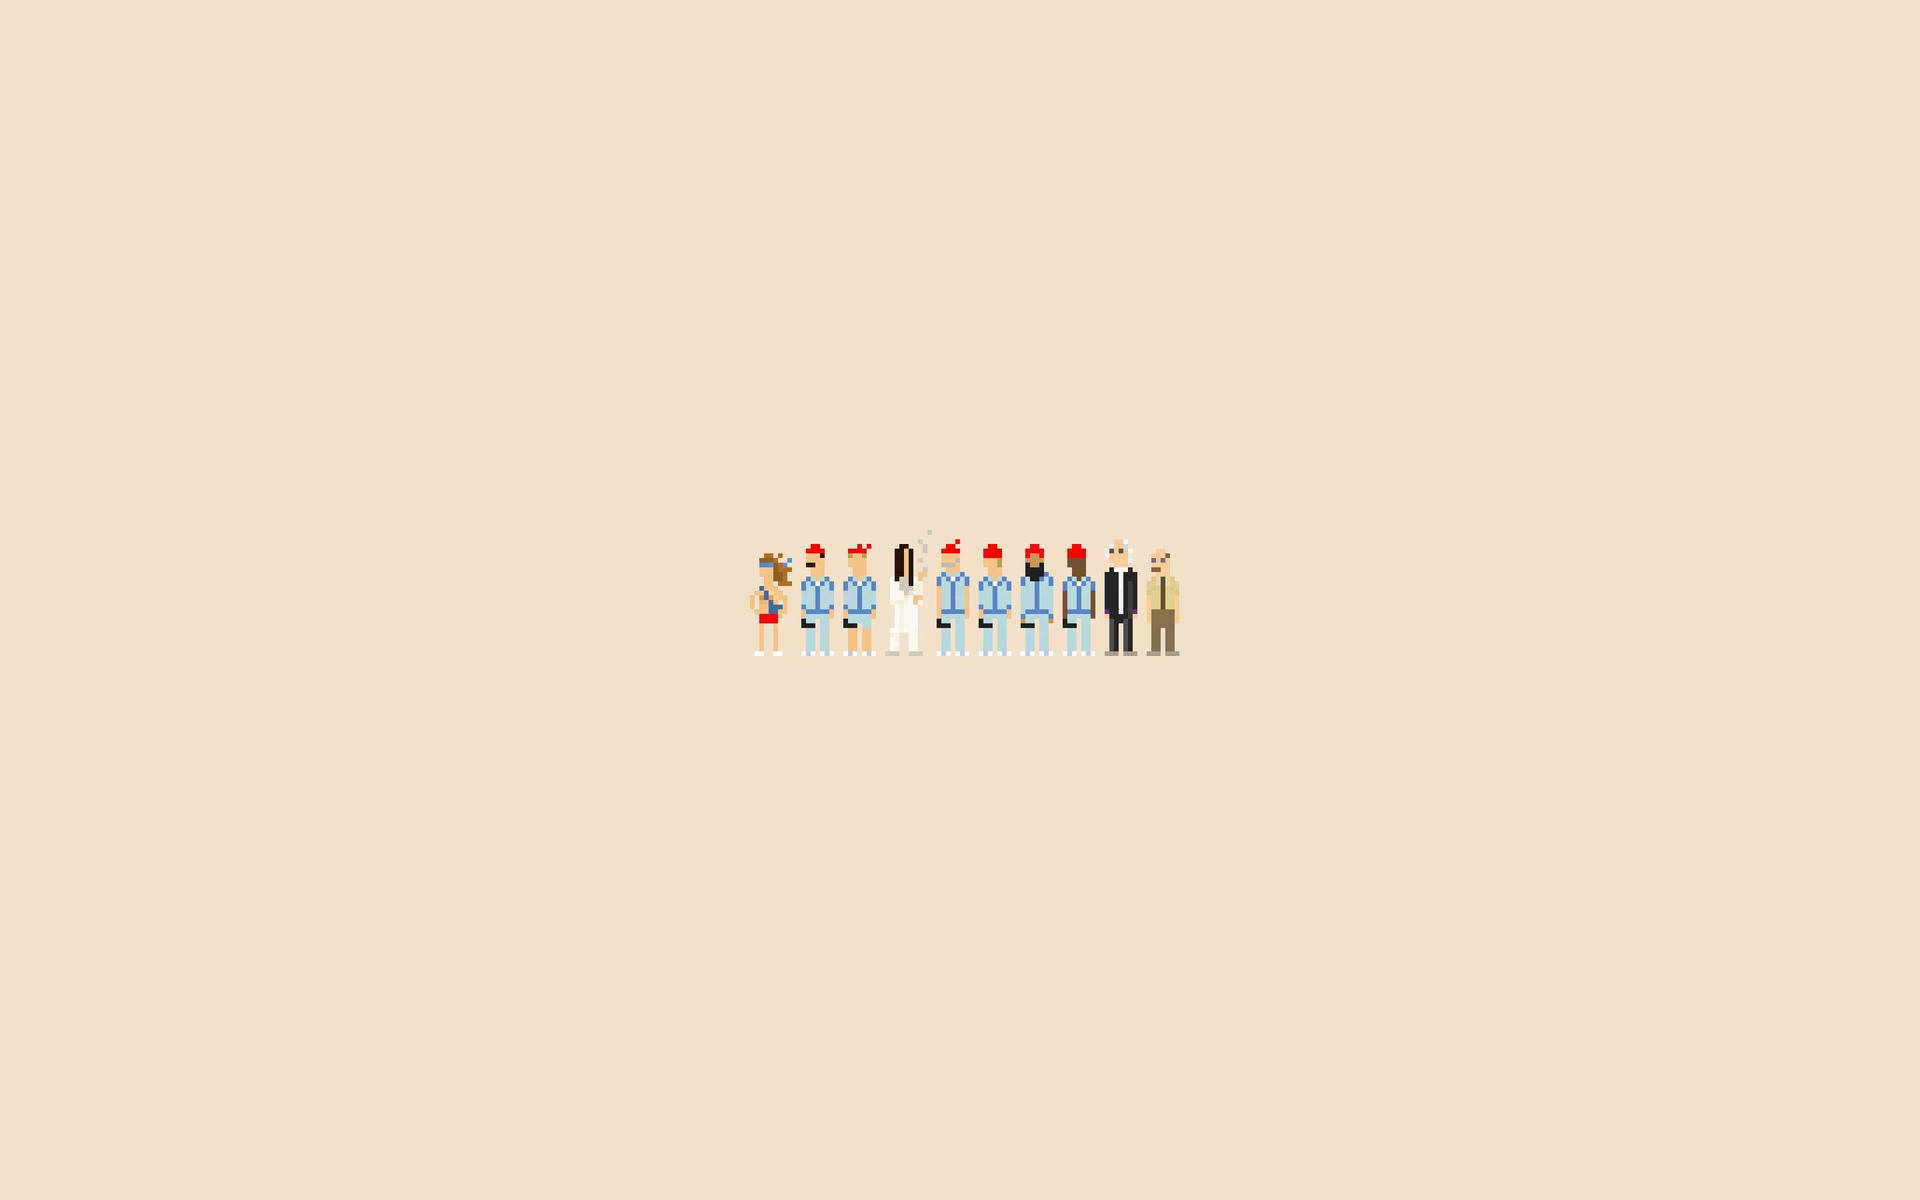 Minimalist Desktop Small Characters Picture